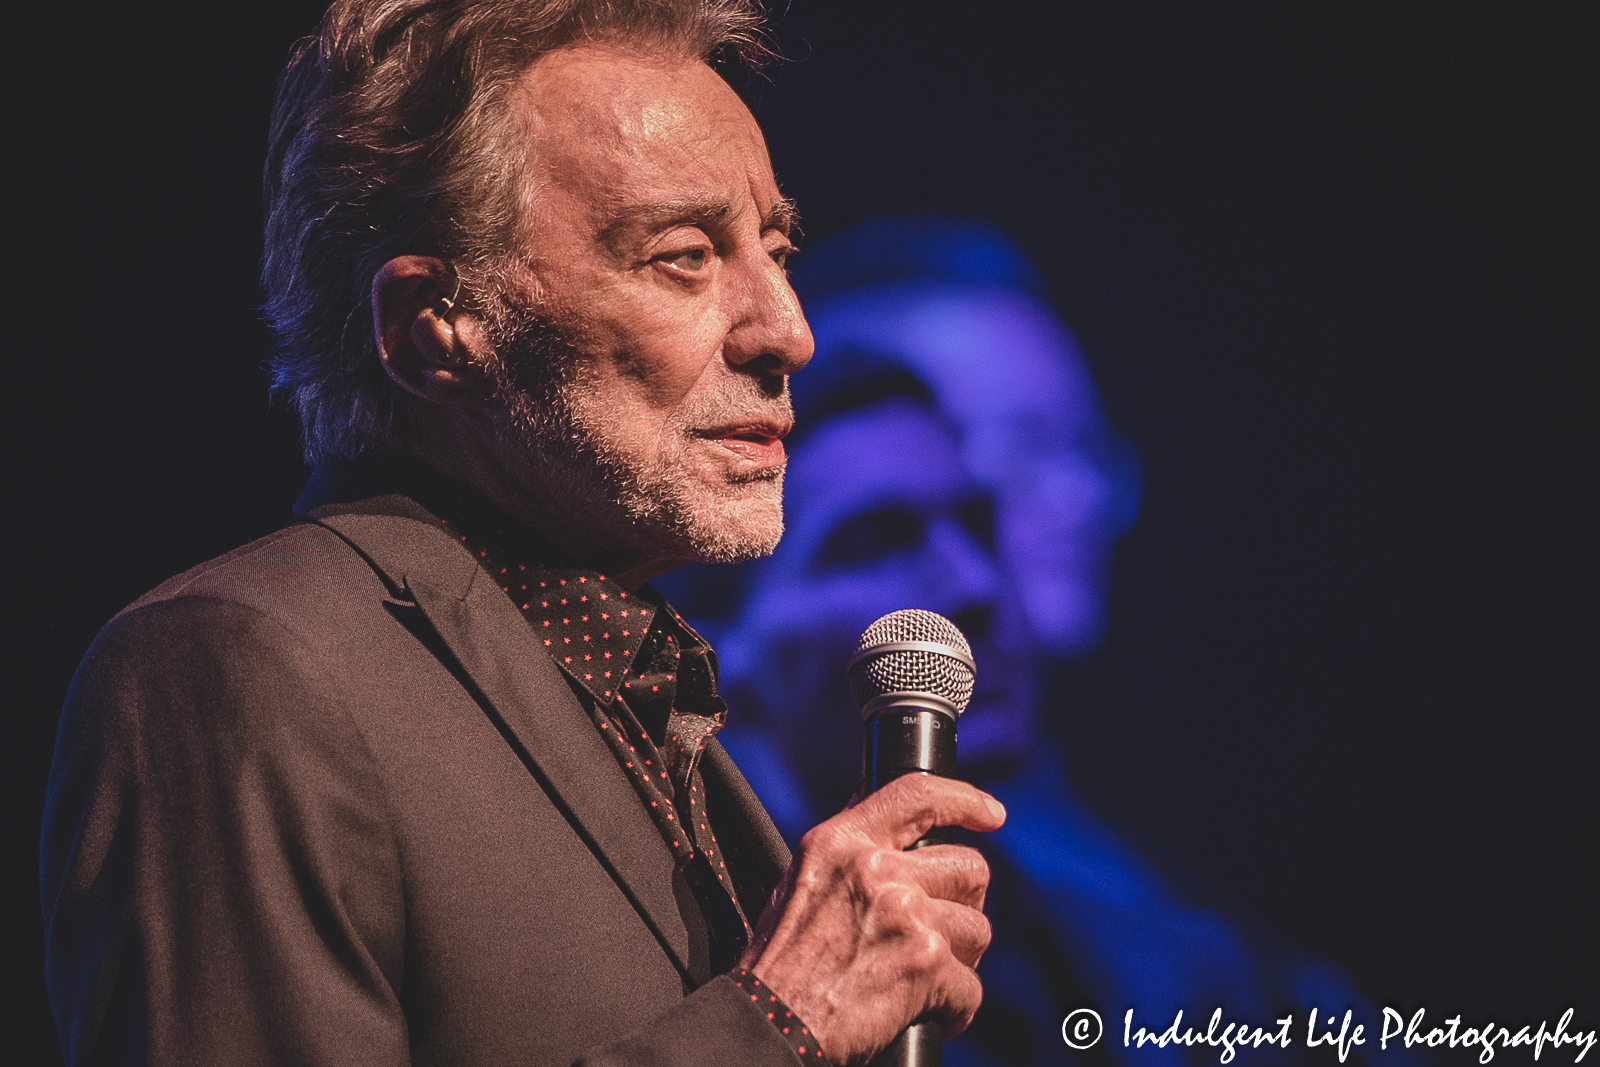 Frankie Valli singing live in concert at Kauffman Center for the Performing Arts in downtown Kansas City, MO on June 4, 2022.